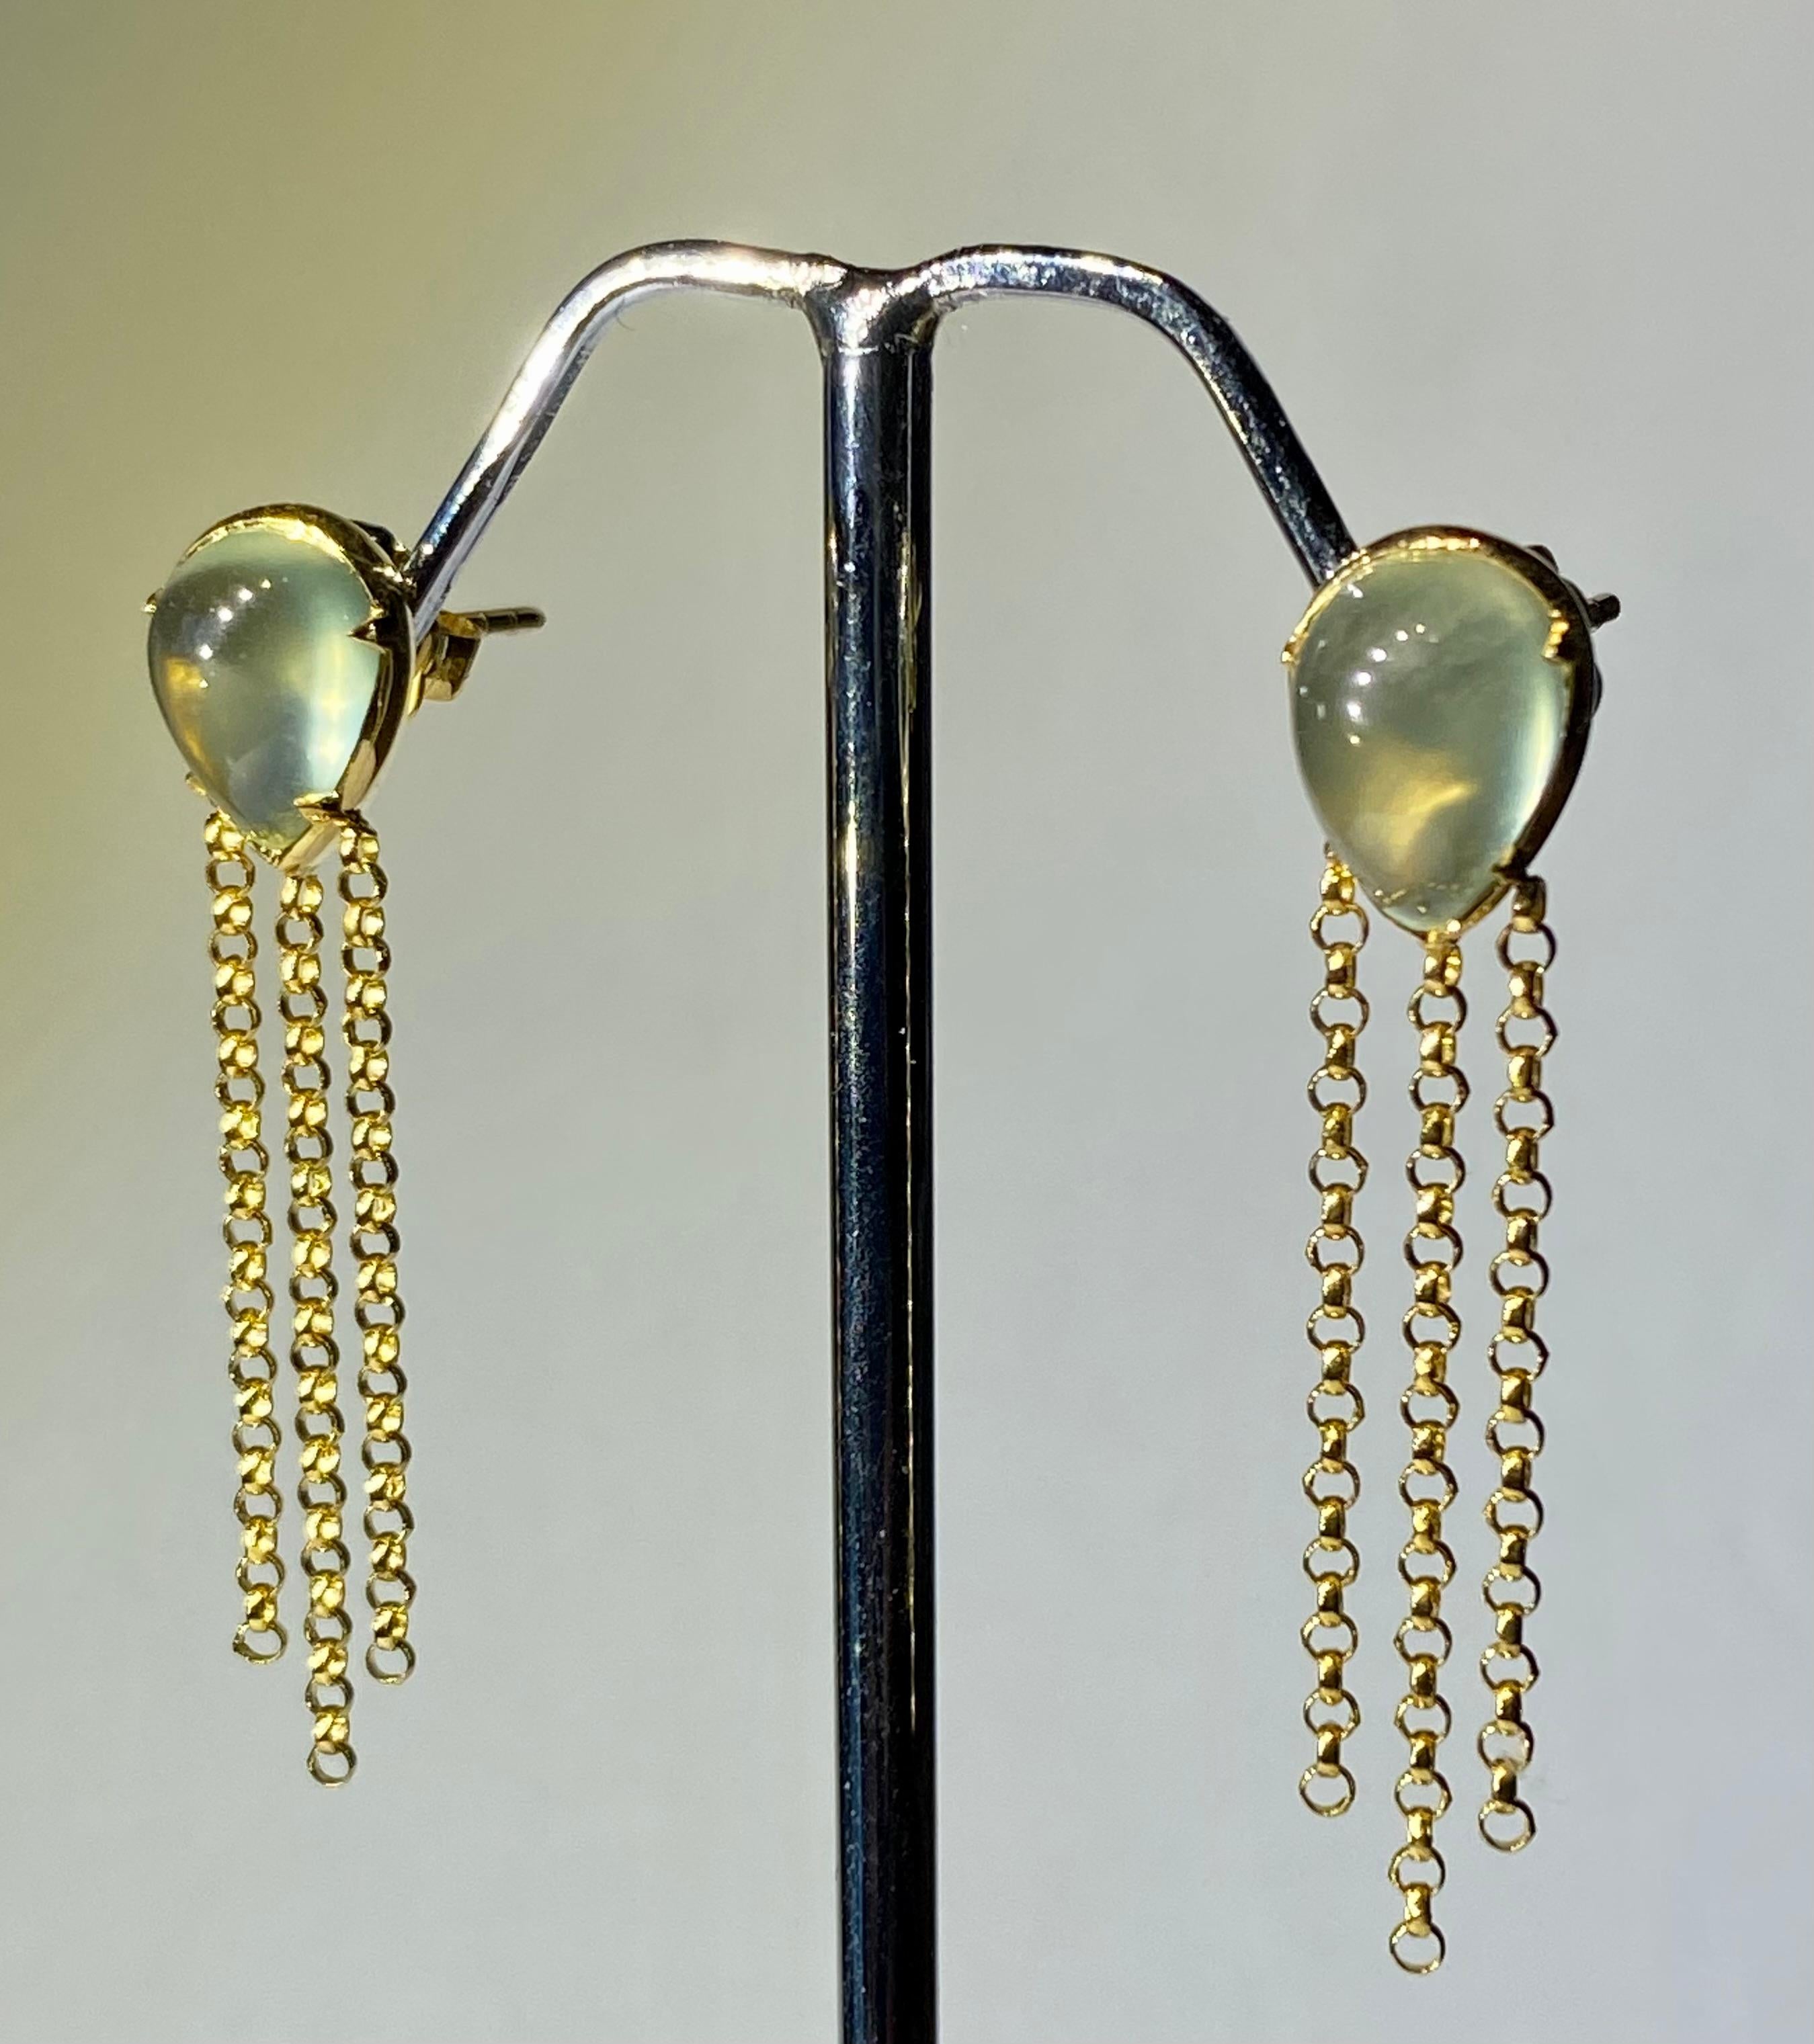 Classical Roman 18kt Gold Dangle Earrings set with Prehnite Cabochons 4